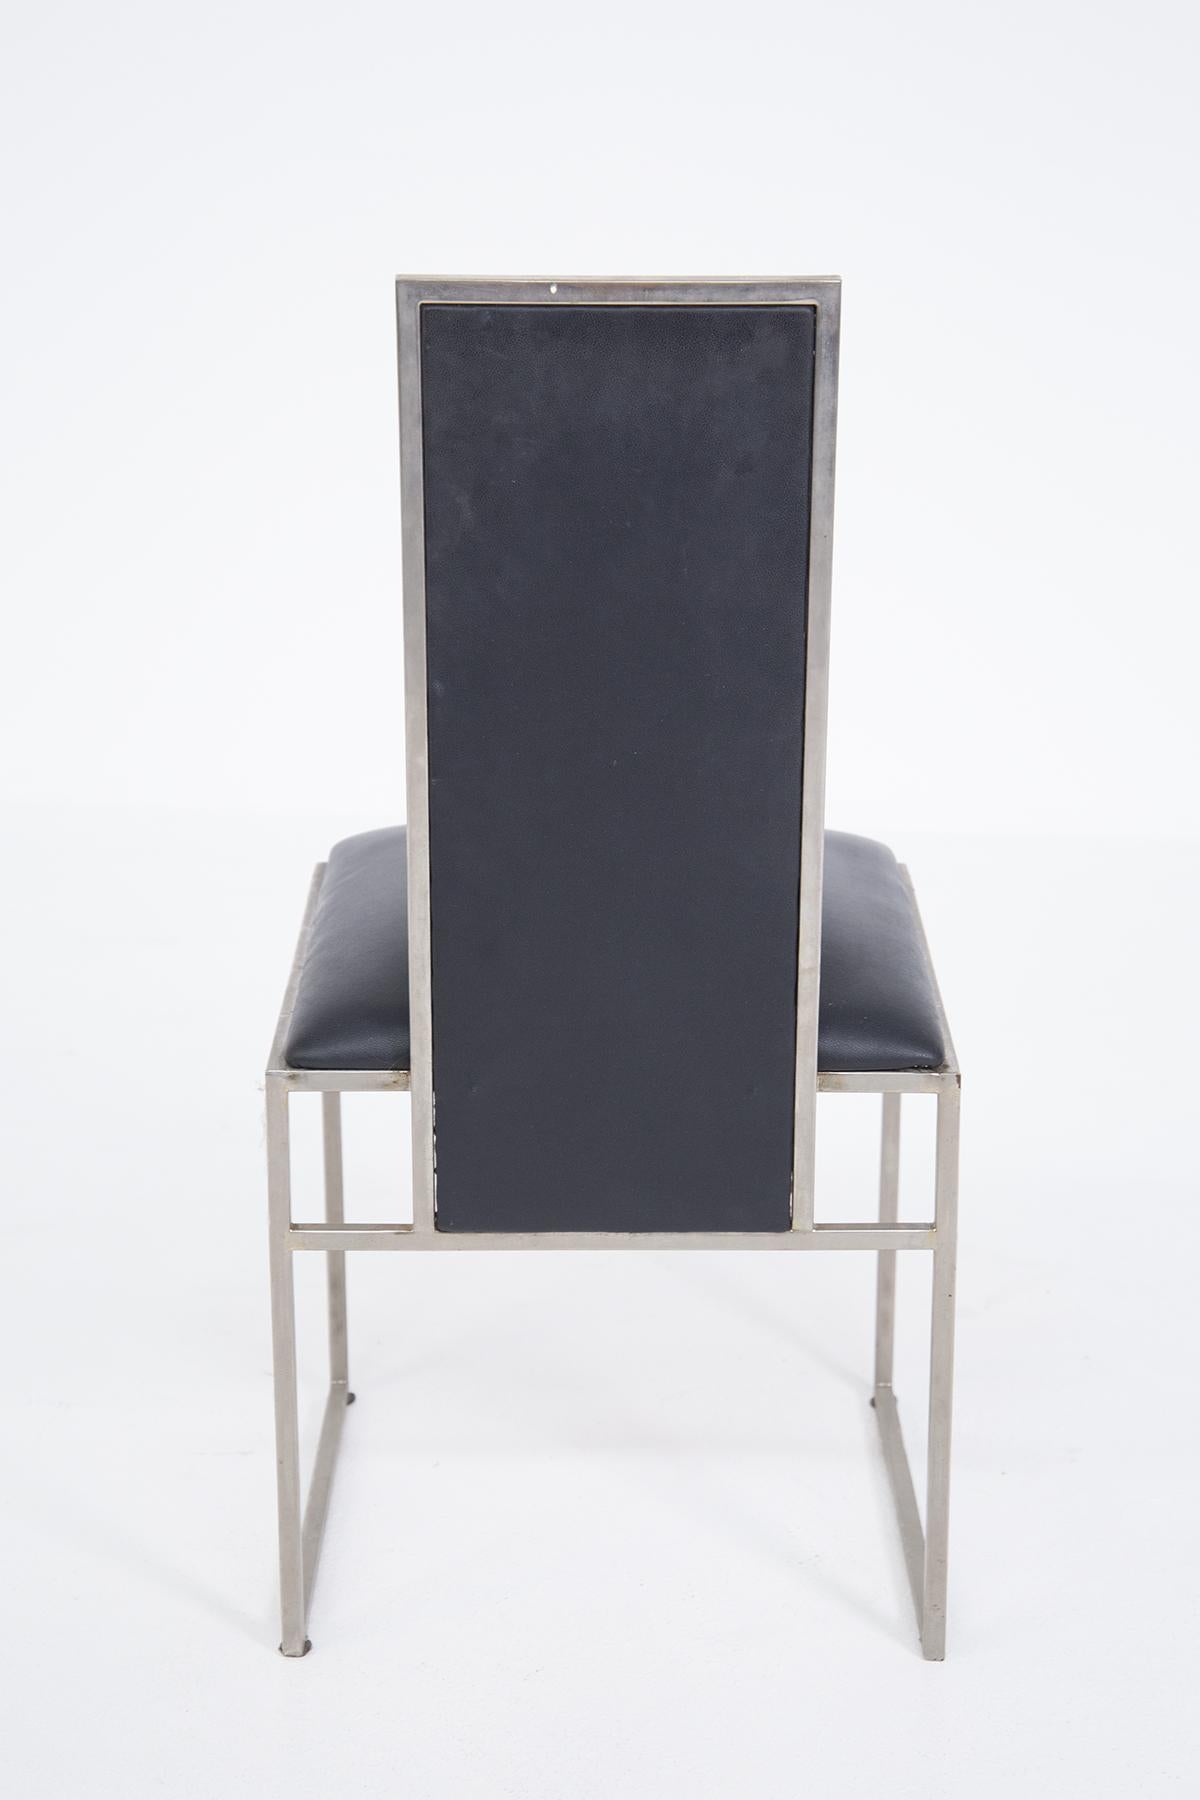 Romeo Rega Set of Six Dining Chair in Black Leather and Steel 3